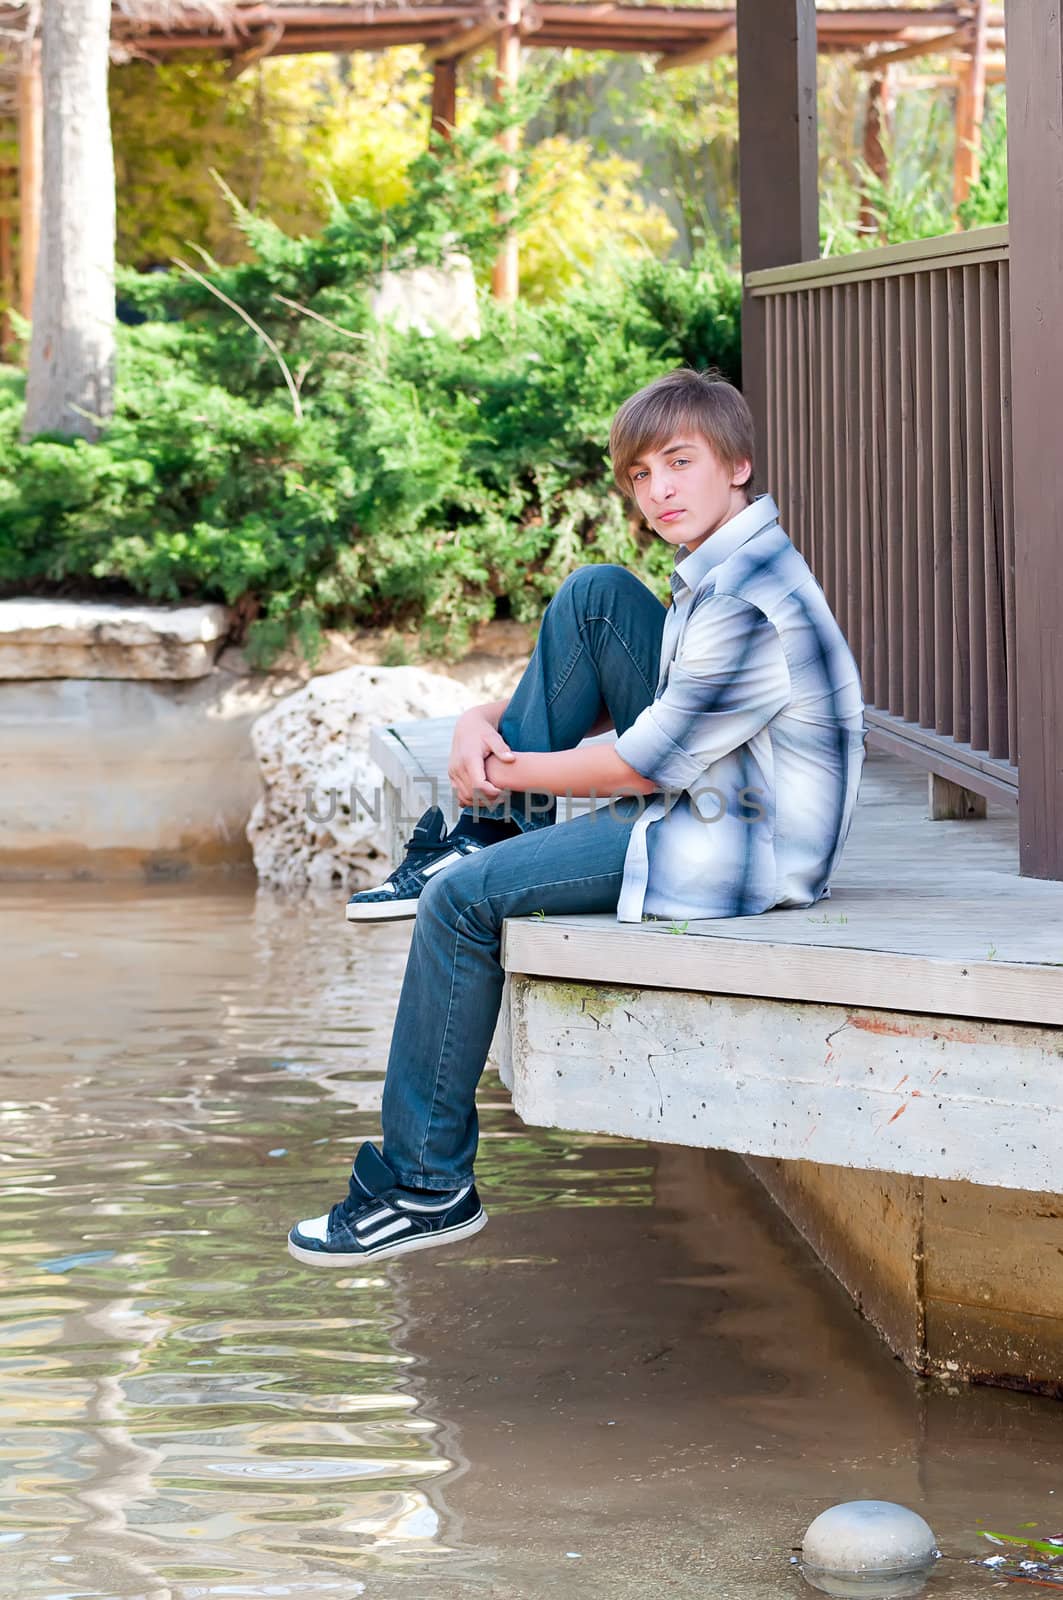 Portrait of a teenager on a background of water in the park.